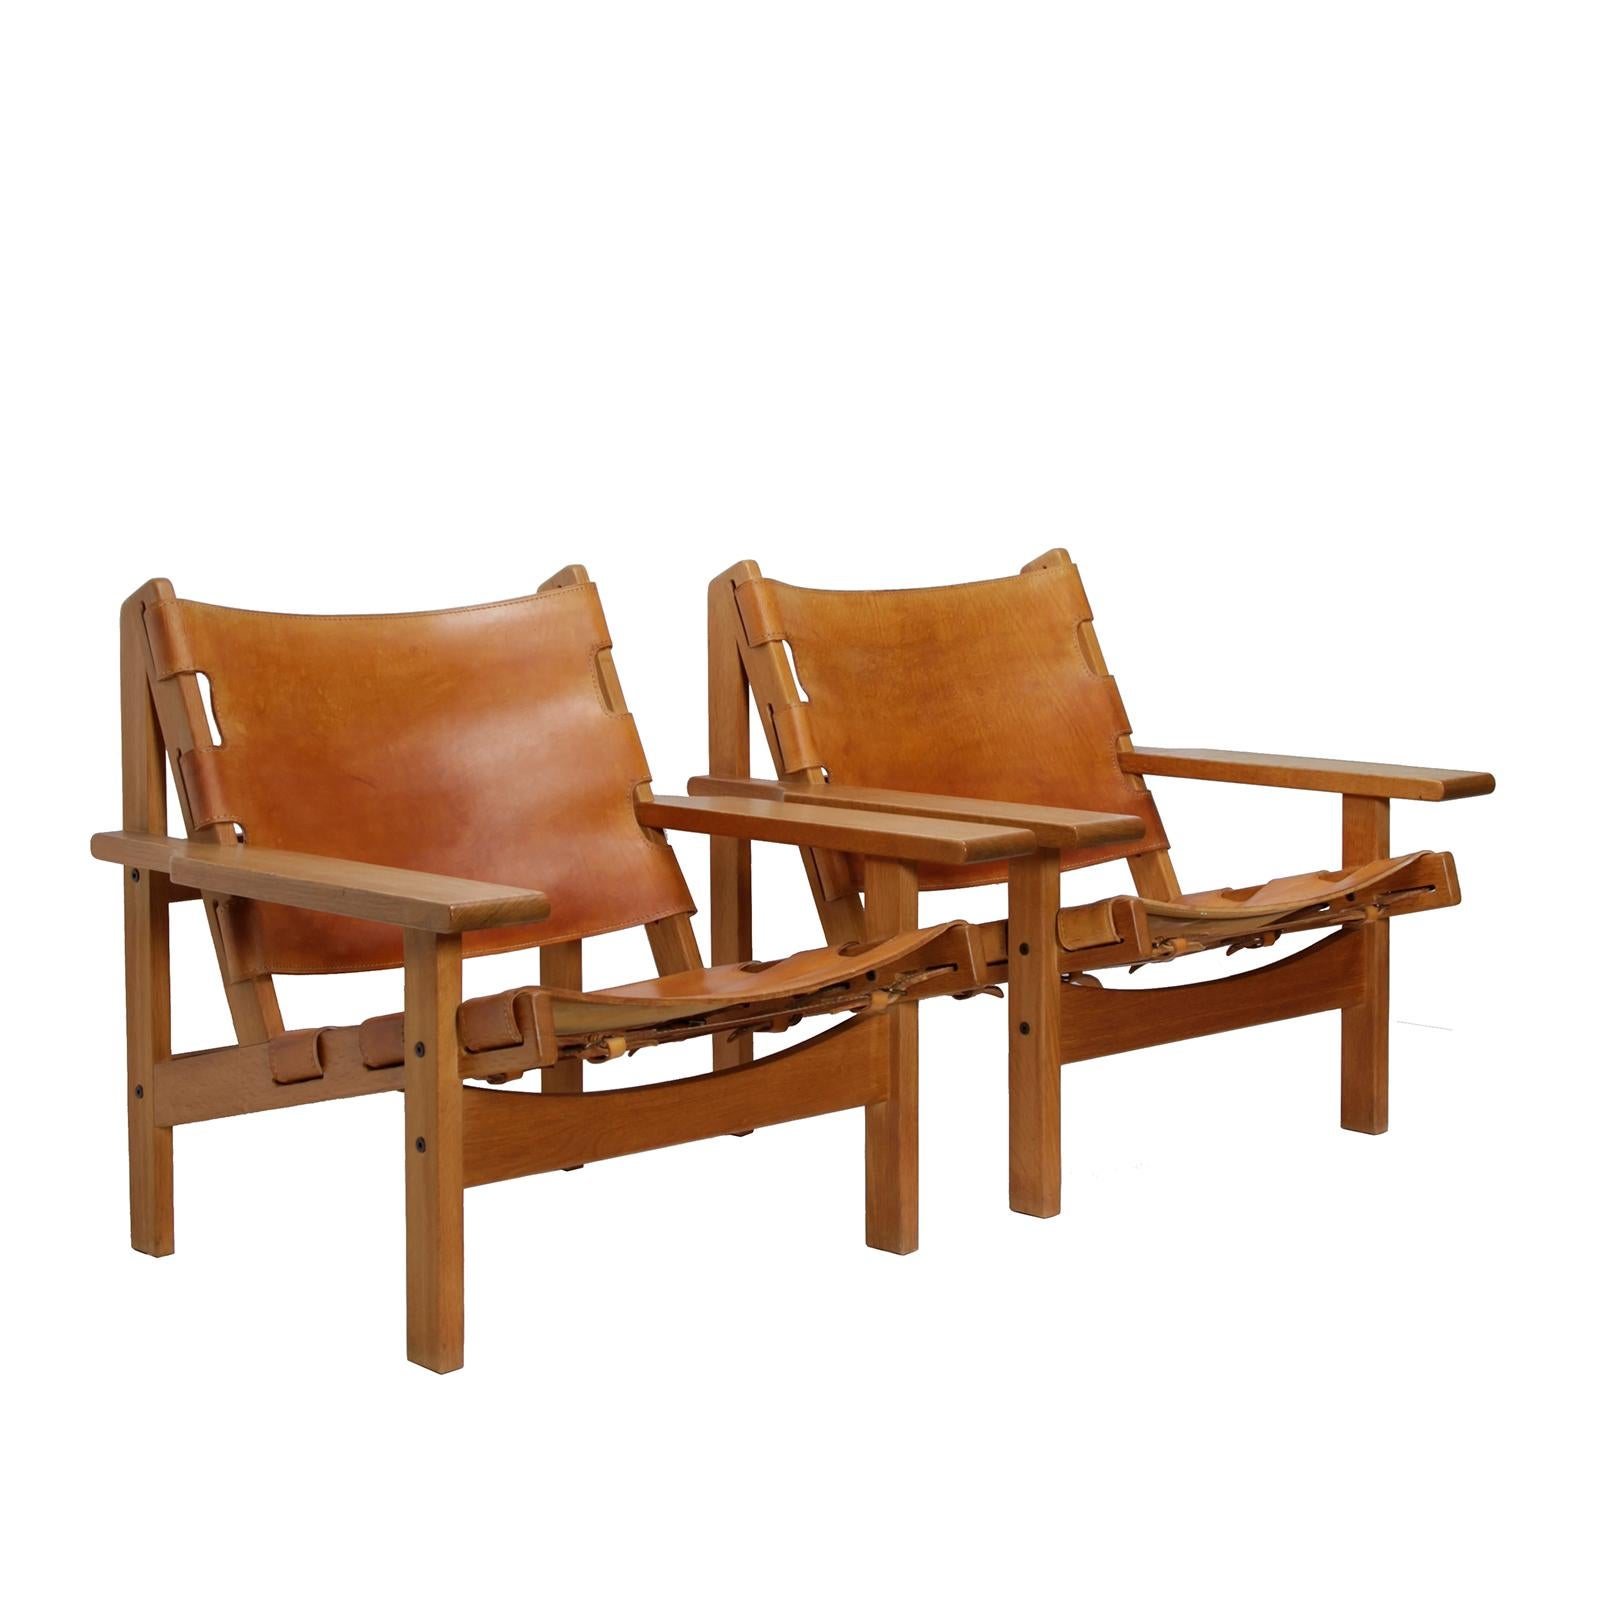 Pair of Danish Hunting Chairs in Oak and Saddle Leather by Kurt Østervig 1